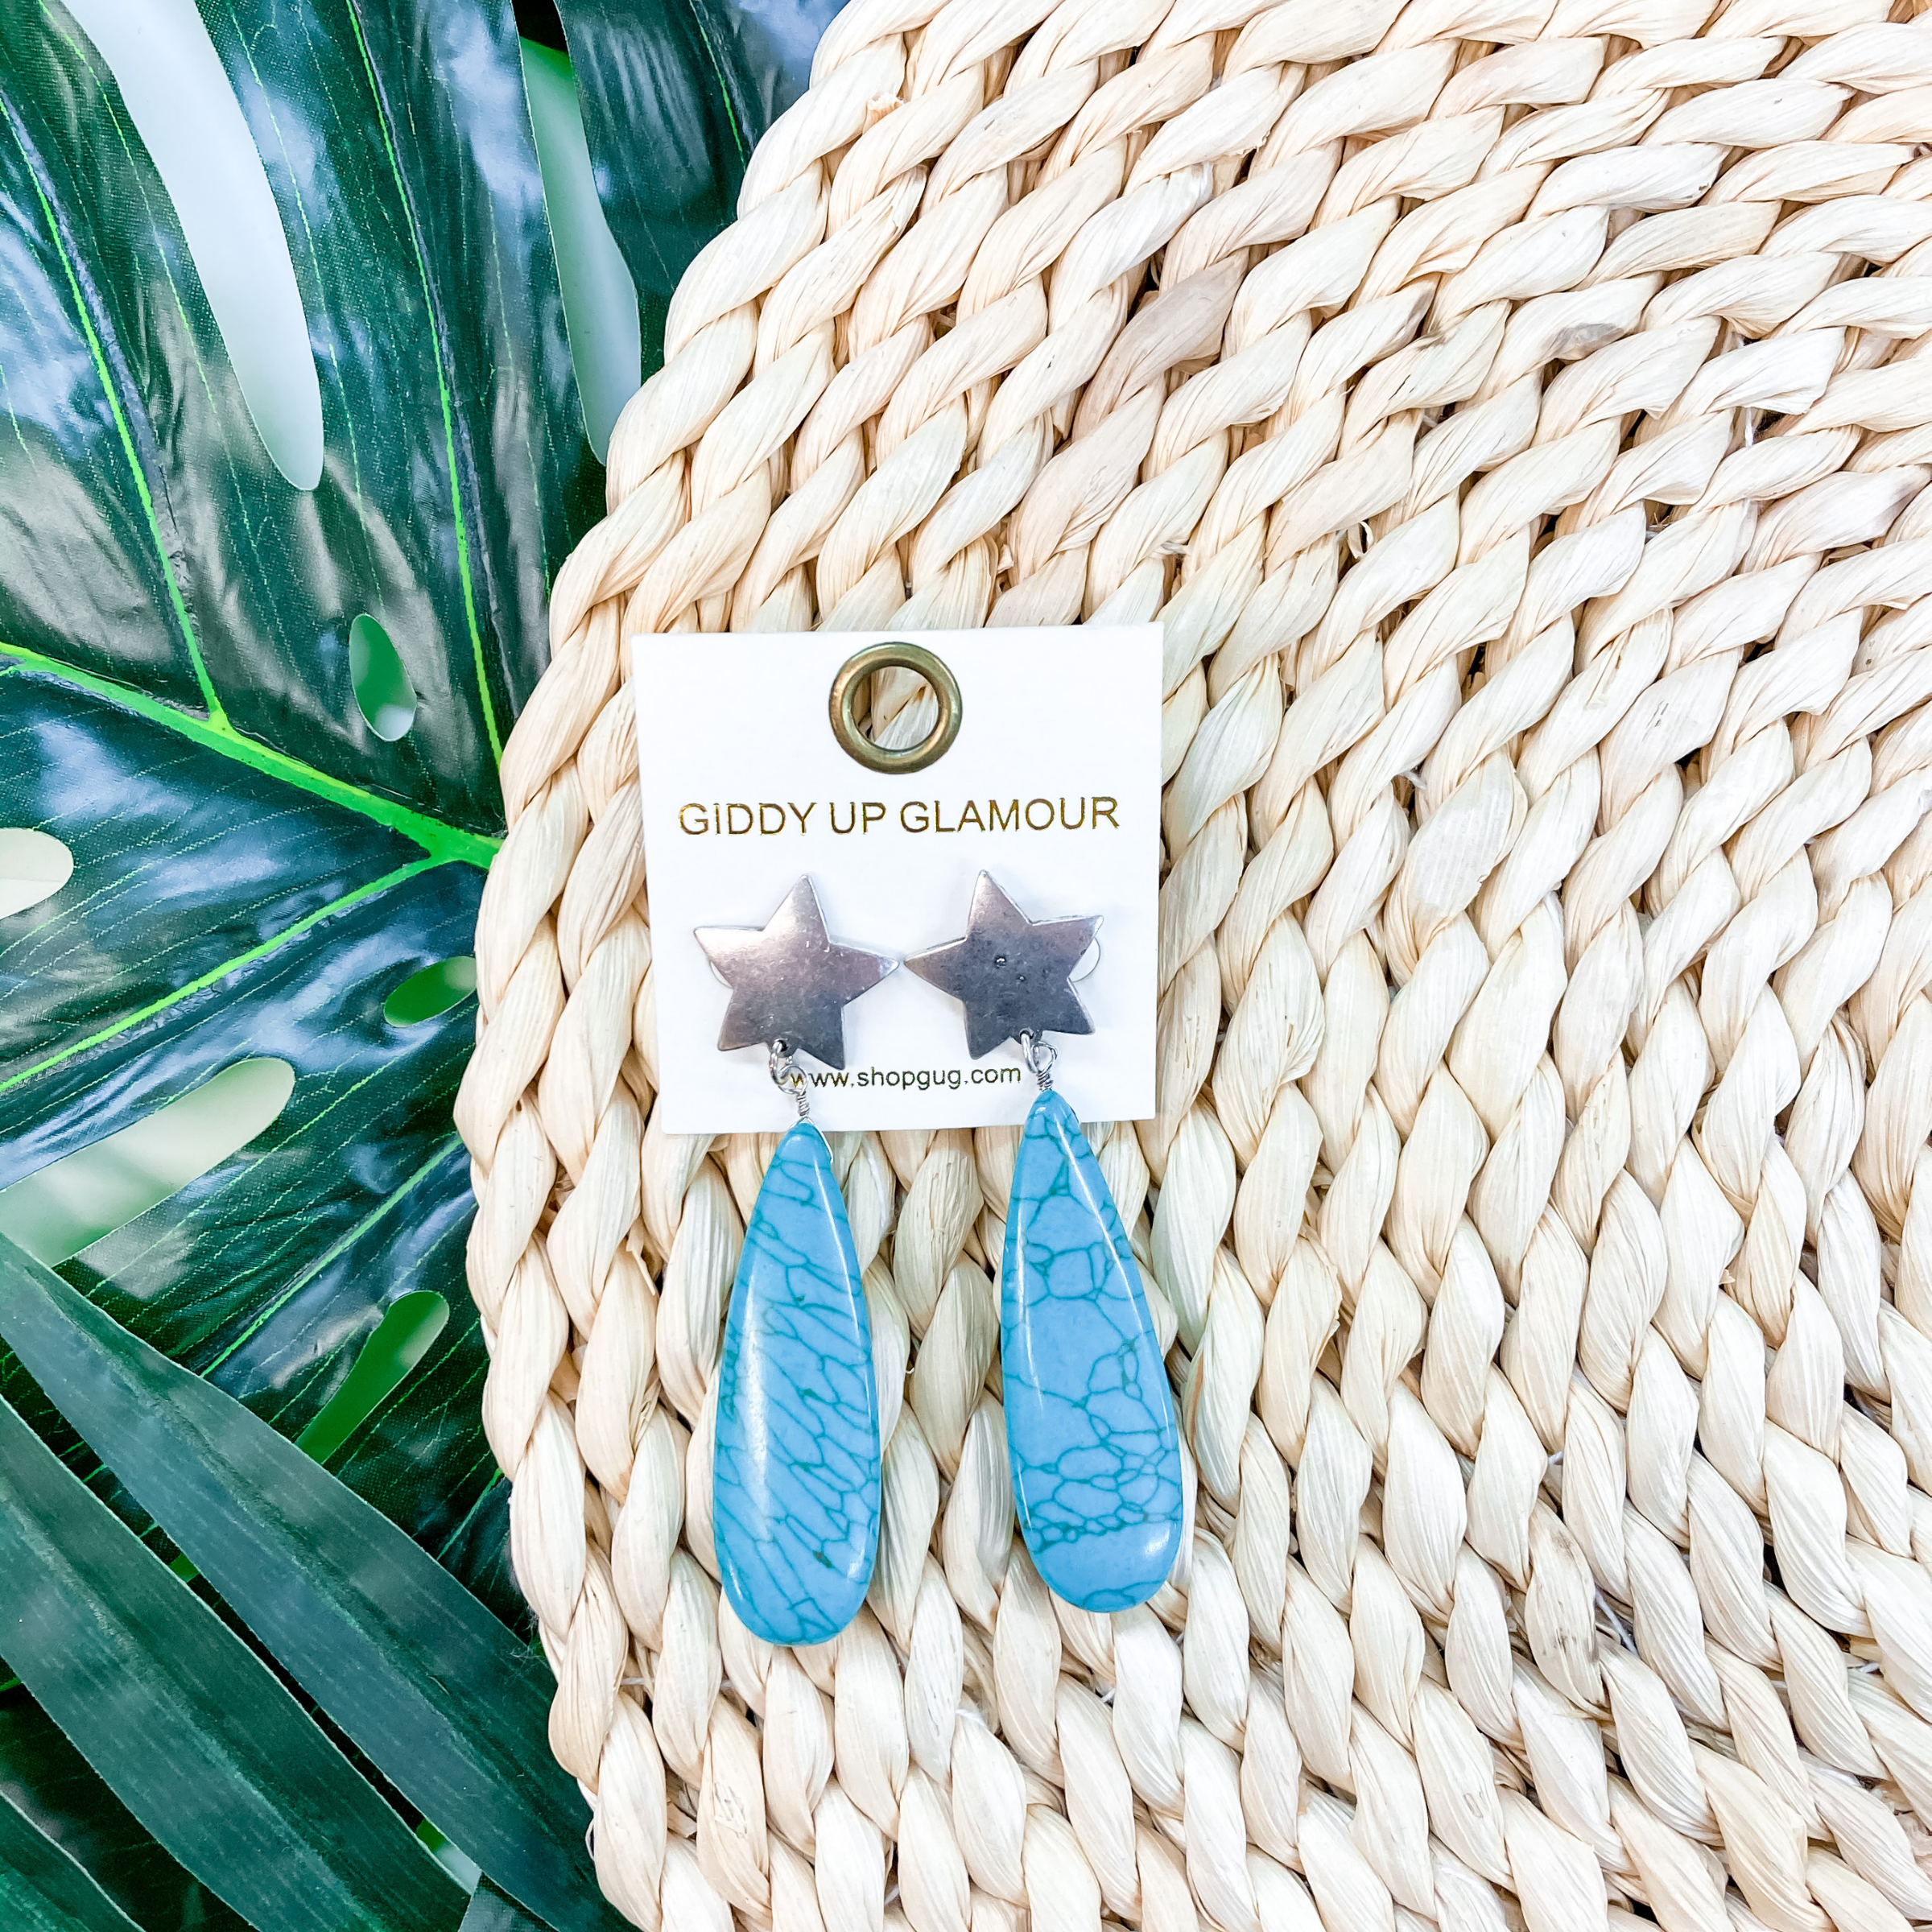 Shoot For The Stars Stone Post Earrings in Turquoise Blue - Giddy Up Glamour Boutique